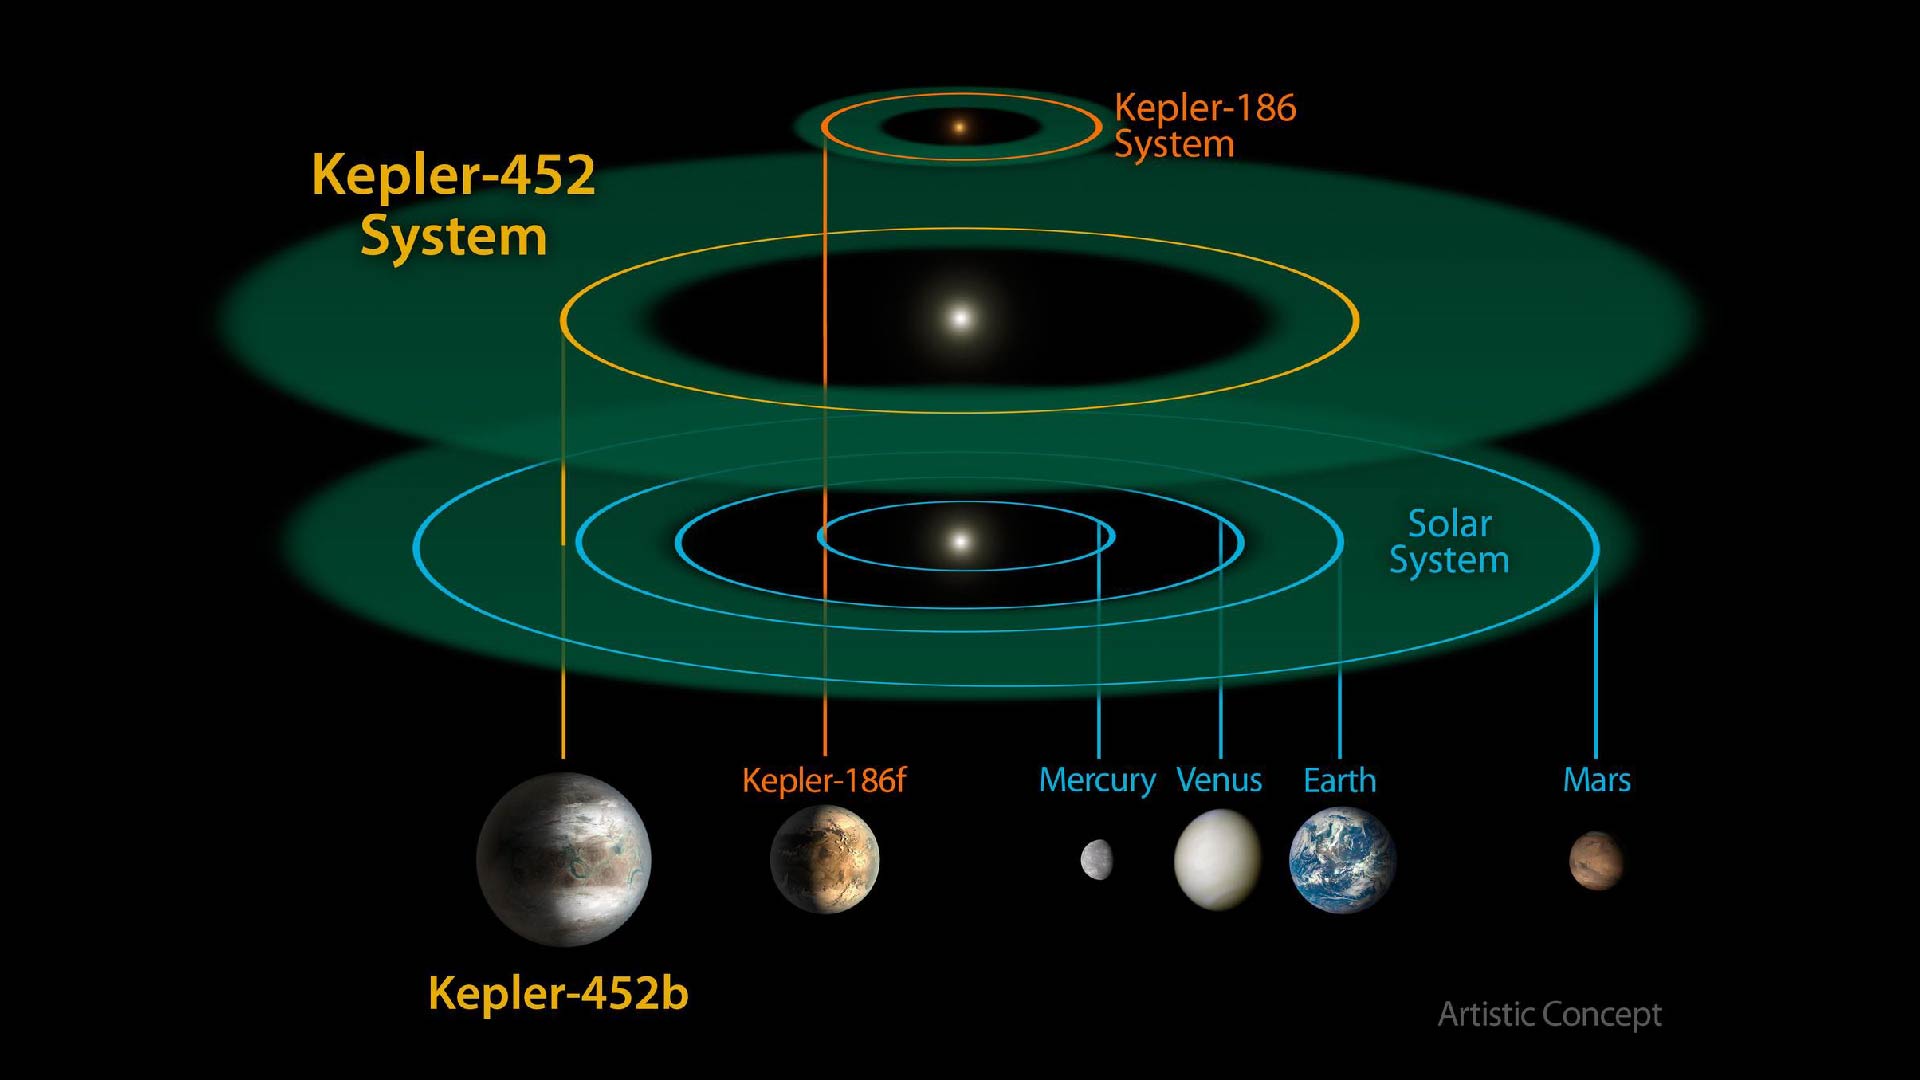 This size and scale of the Kepler-452 system compared alongside the Kepler-186 system and the solar system. Kepler-186 is a miniature solar system that would fit entirely inside the orbit of Mercury. The habitable zone of Kepler-186 is very small compared to that of Kepler-452 or the sun because it is a much smaller, cooler star. The size and extent of the habitable zone of Kepler-452 is nearly the same as that of the sun, but is slightly bigger because Kepler-452 is somewhat older, bigger and brighter. The size of the orbit of Kepler-452b is nearly the same as that of Earth at 1.05 astronomical units (an astronomical unit is the distance between Earth and the sun).